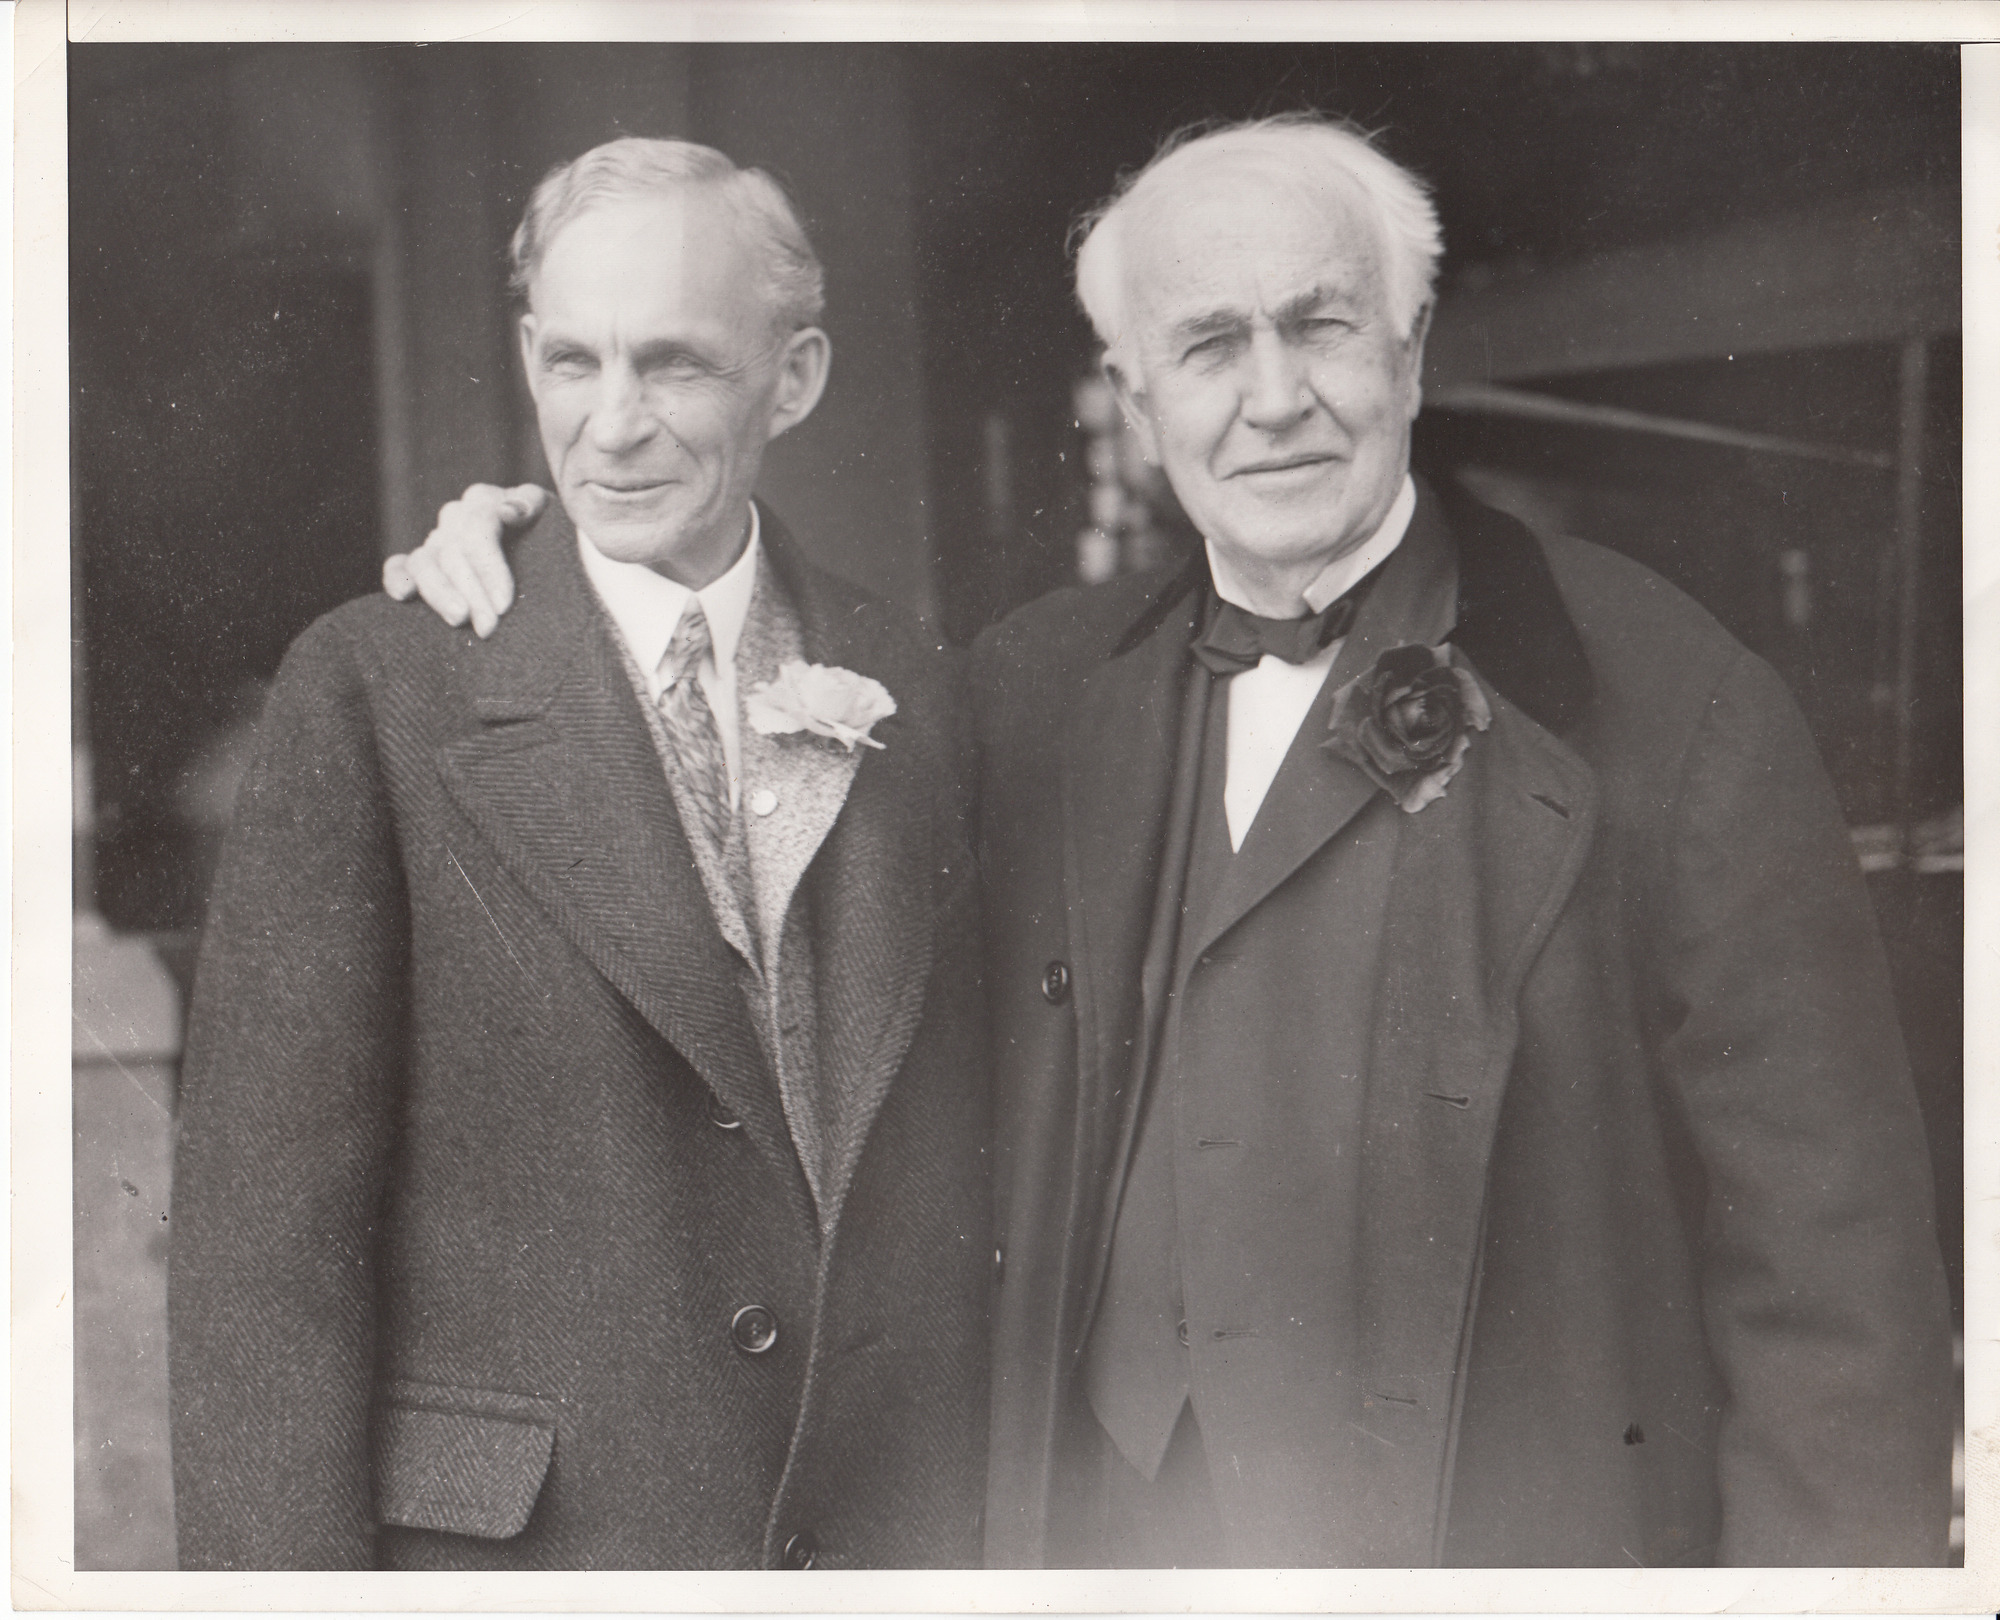 Thomas Edison and Henry Ford on Edison's 80th birthday.